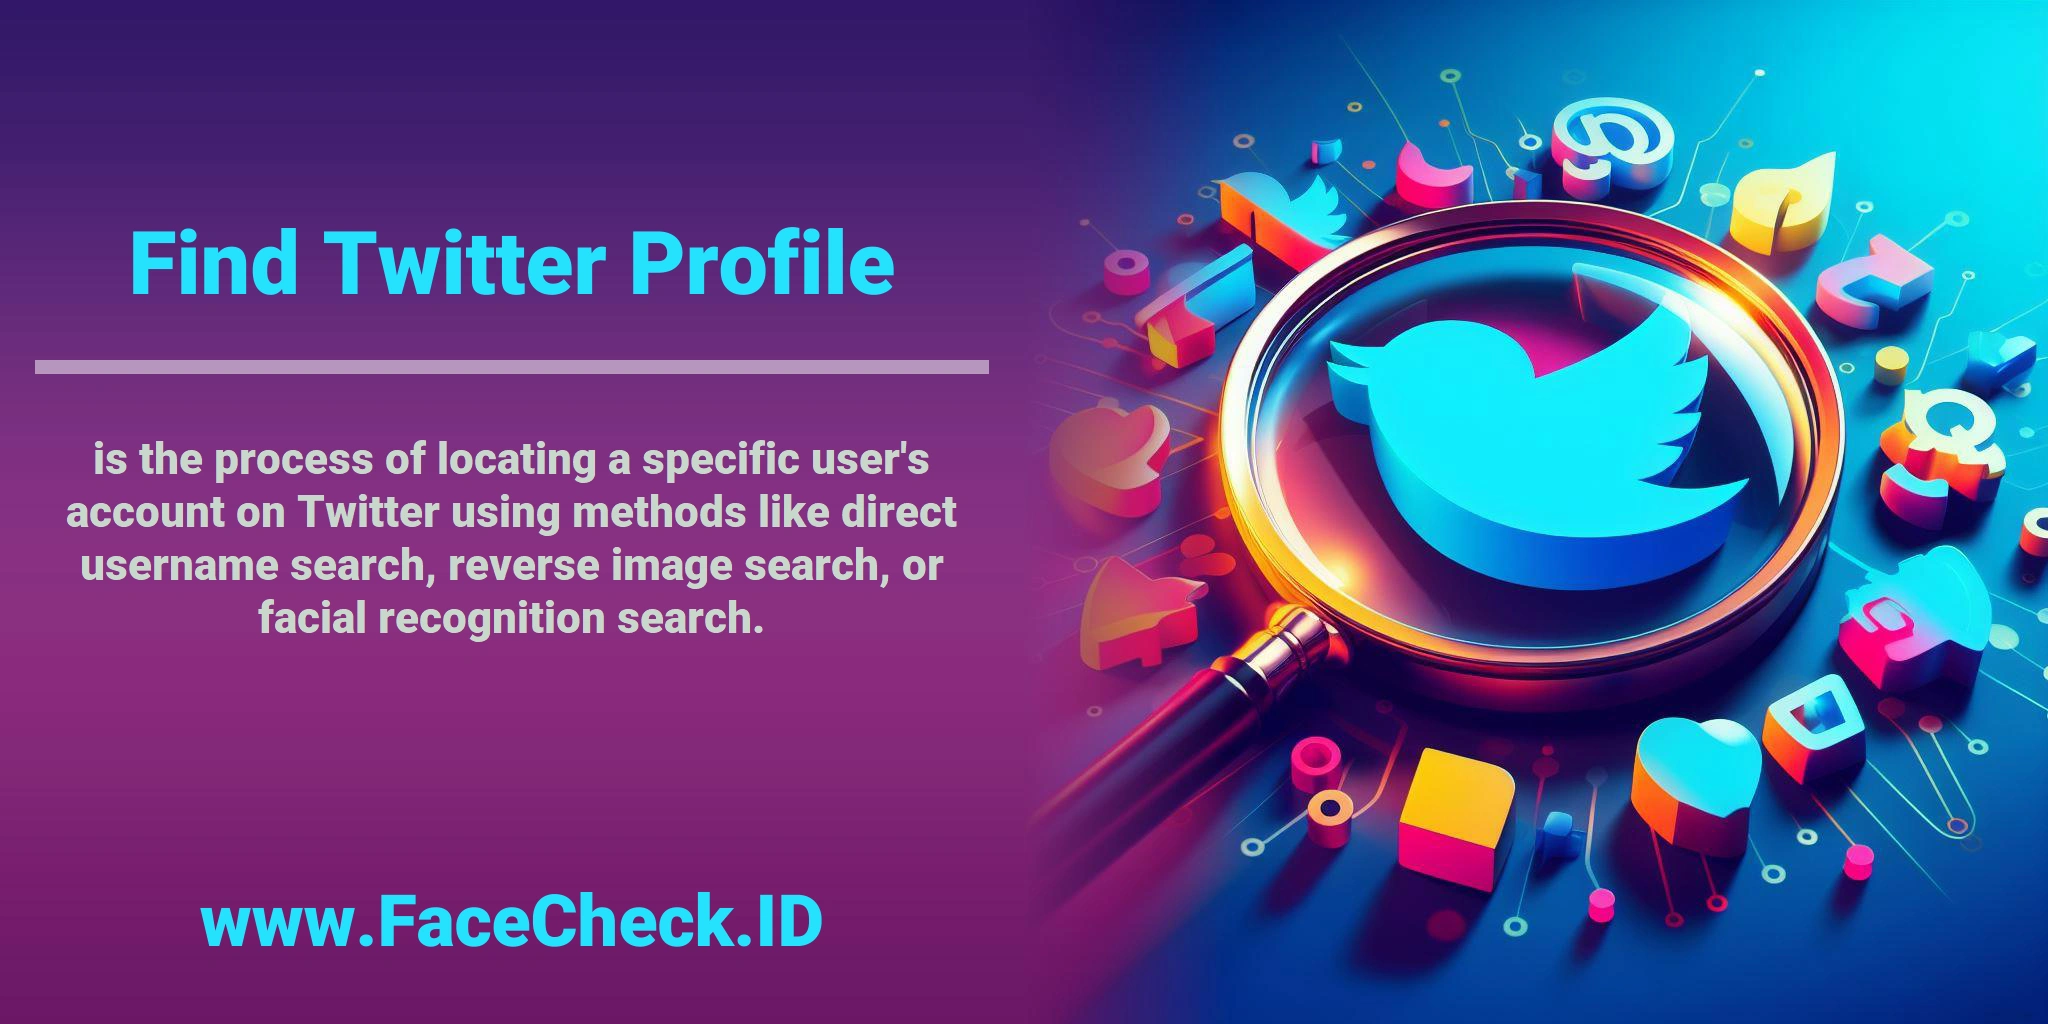 <b>Find Twitter Profile</b> is the process of locating a specific user's account on Twitter using methods like direct username search, reverse image search, or facial recognition search.